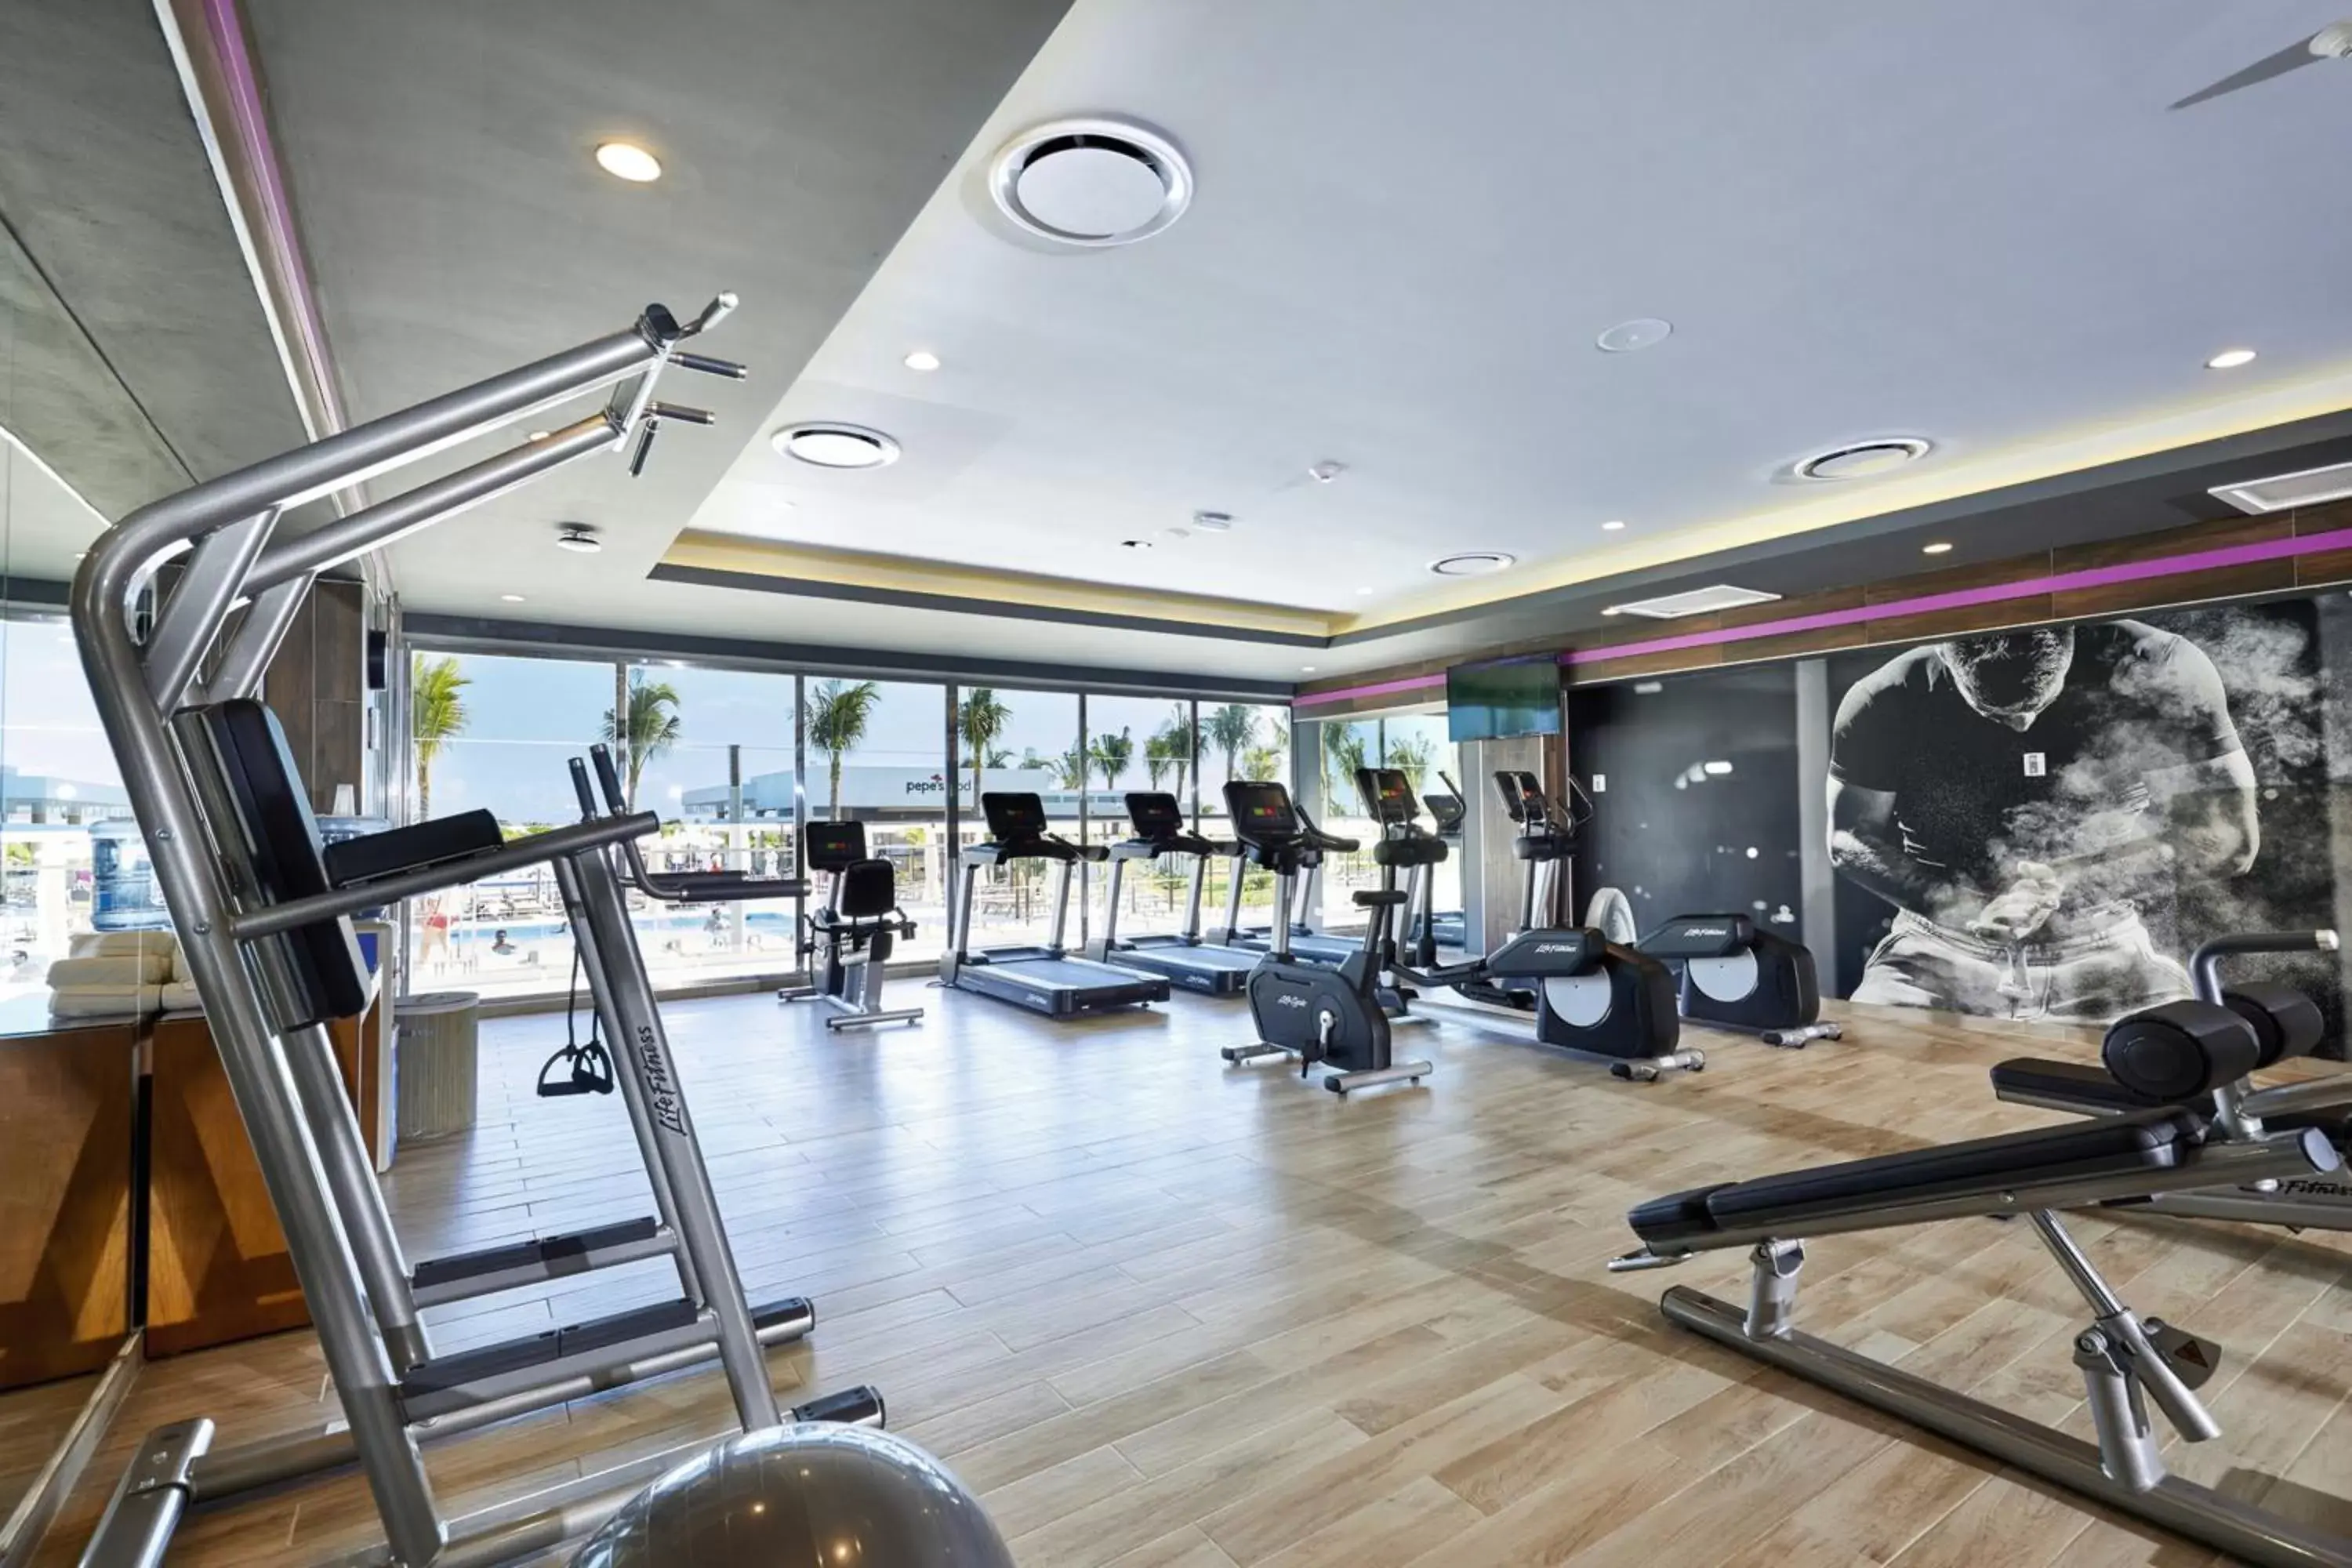 Fitness centre/facilities, Fitness Center/Facilities in Riu Palace Costa Mujeres - All Inclusive